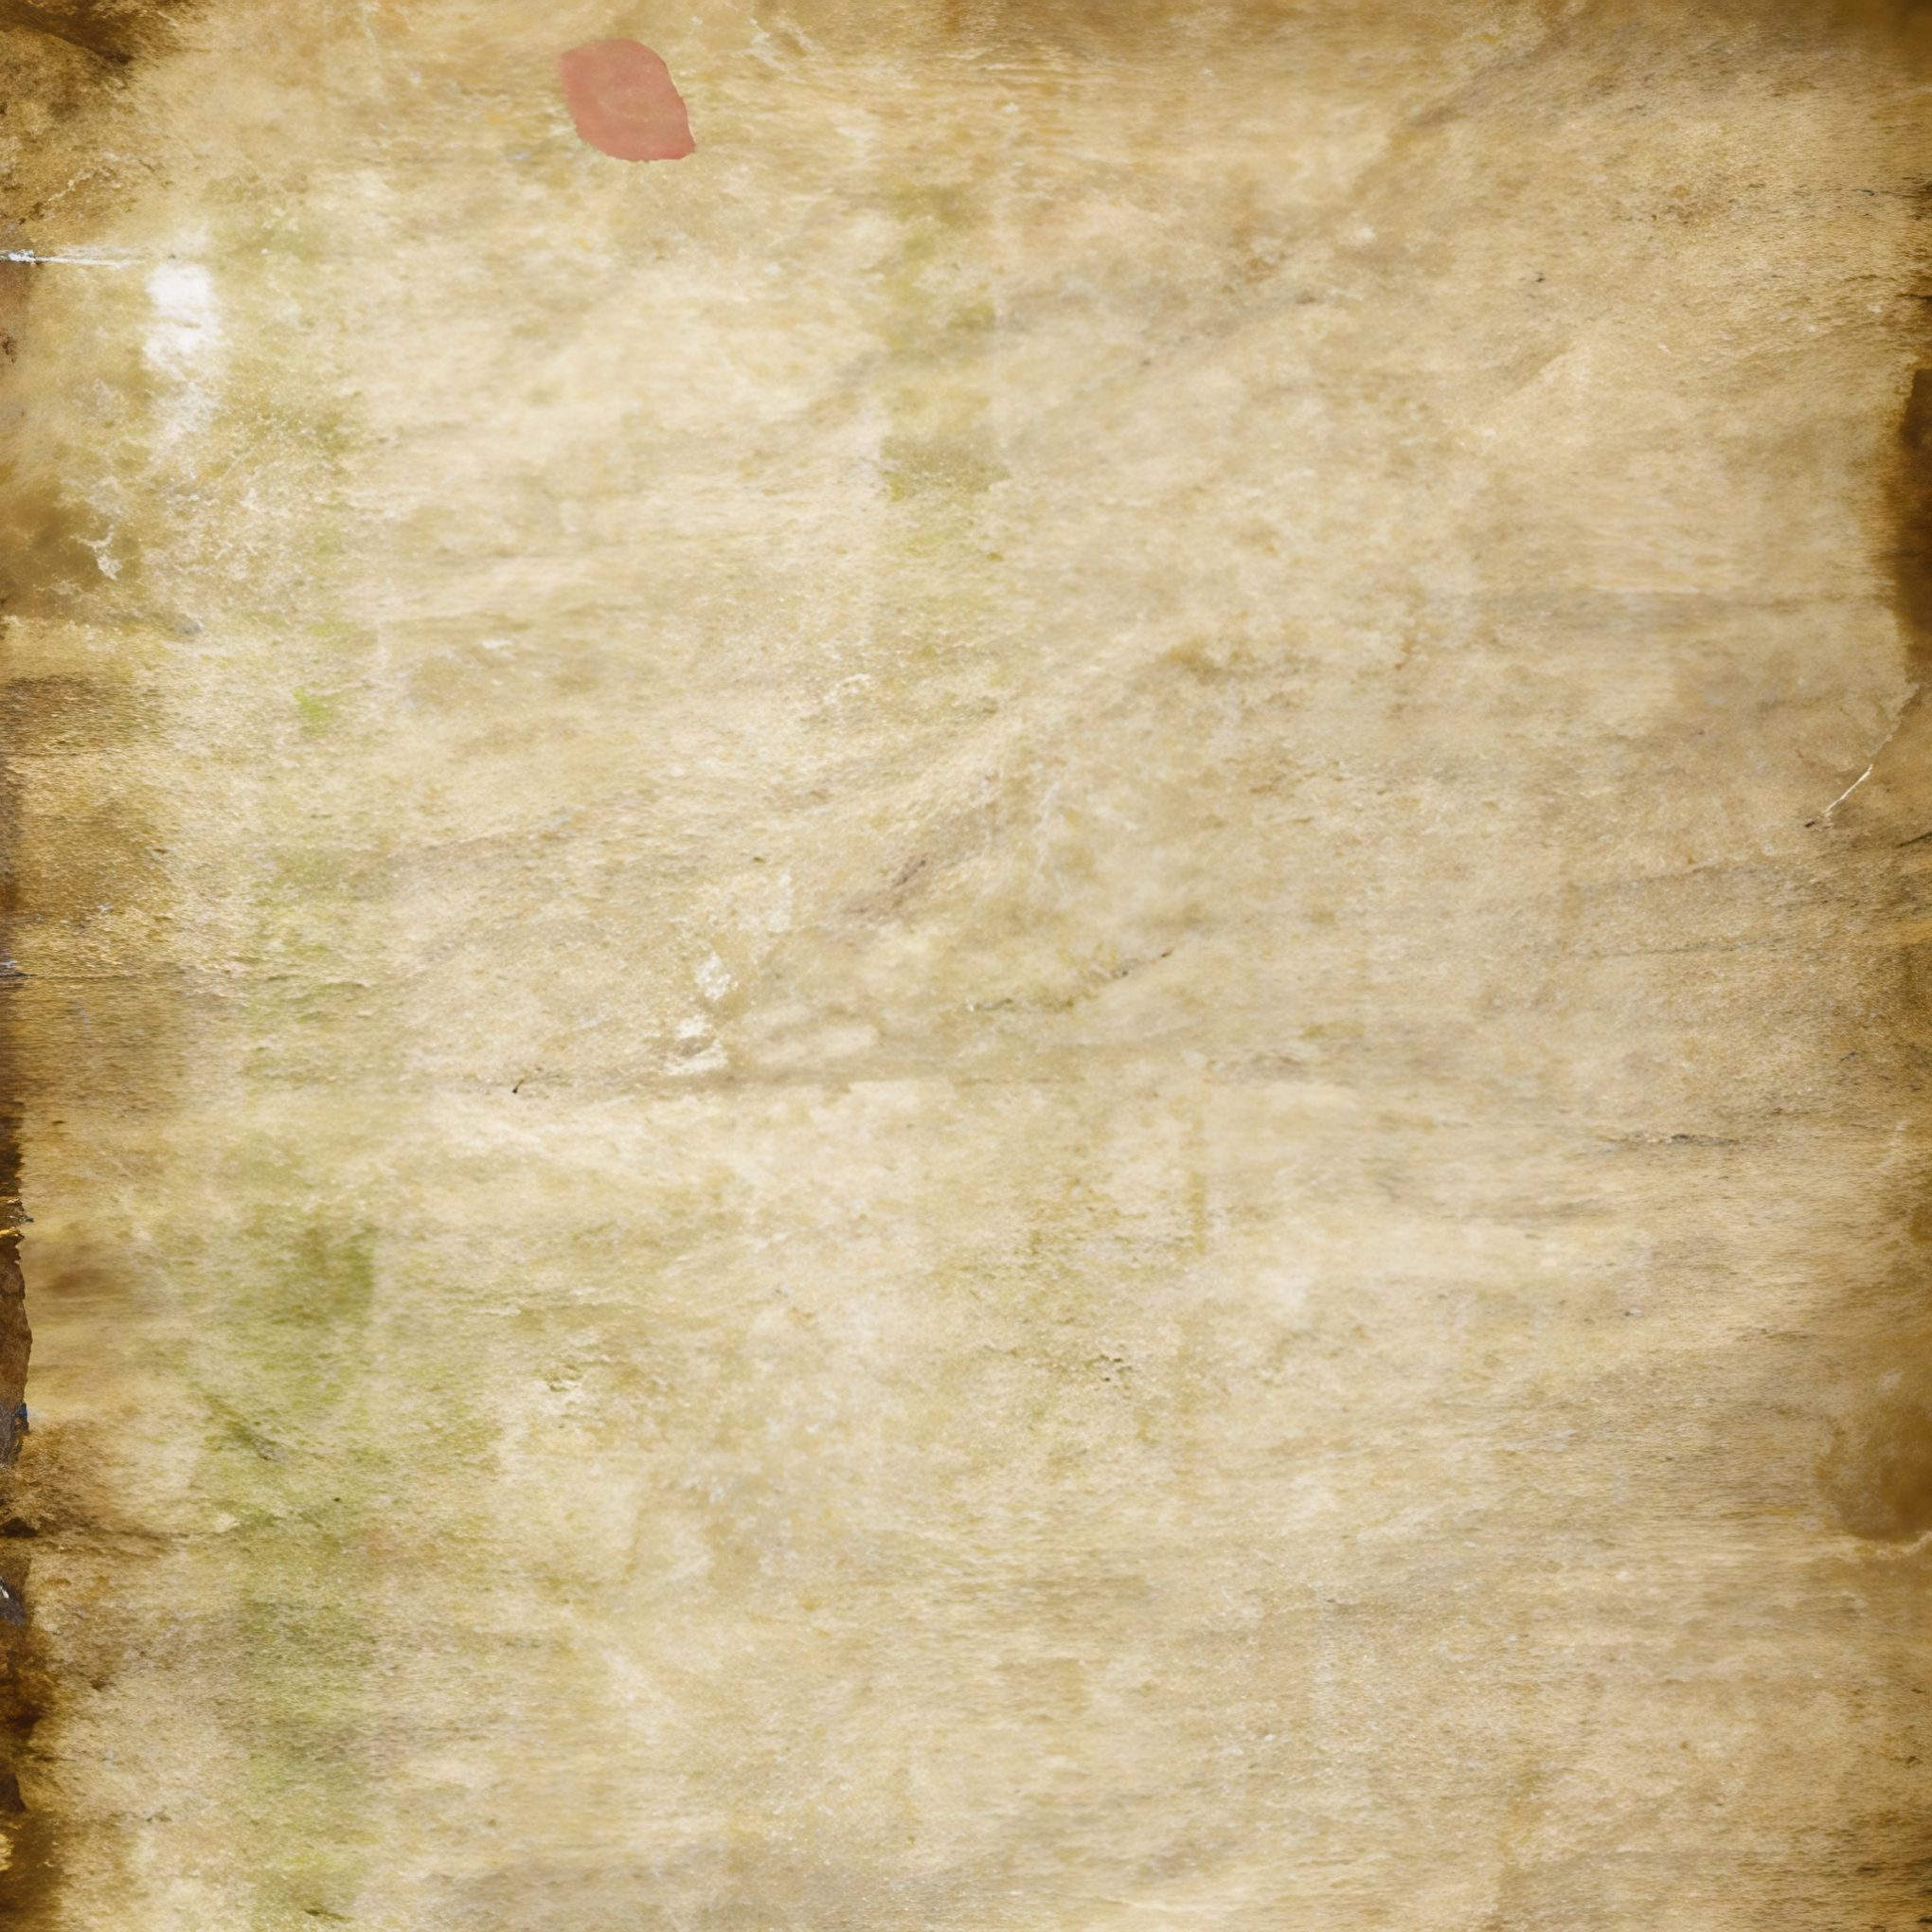 Old Stained Paper Free Stock Image Download